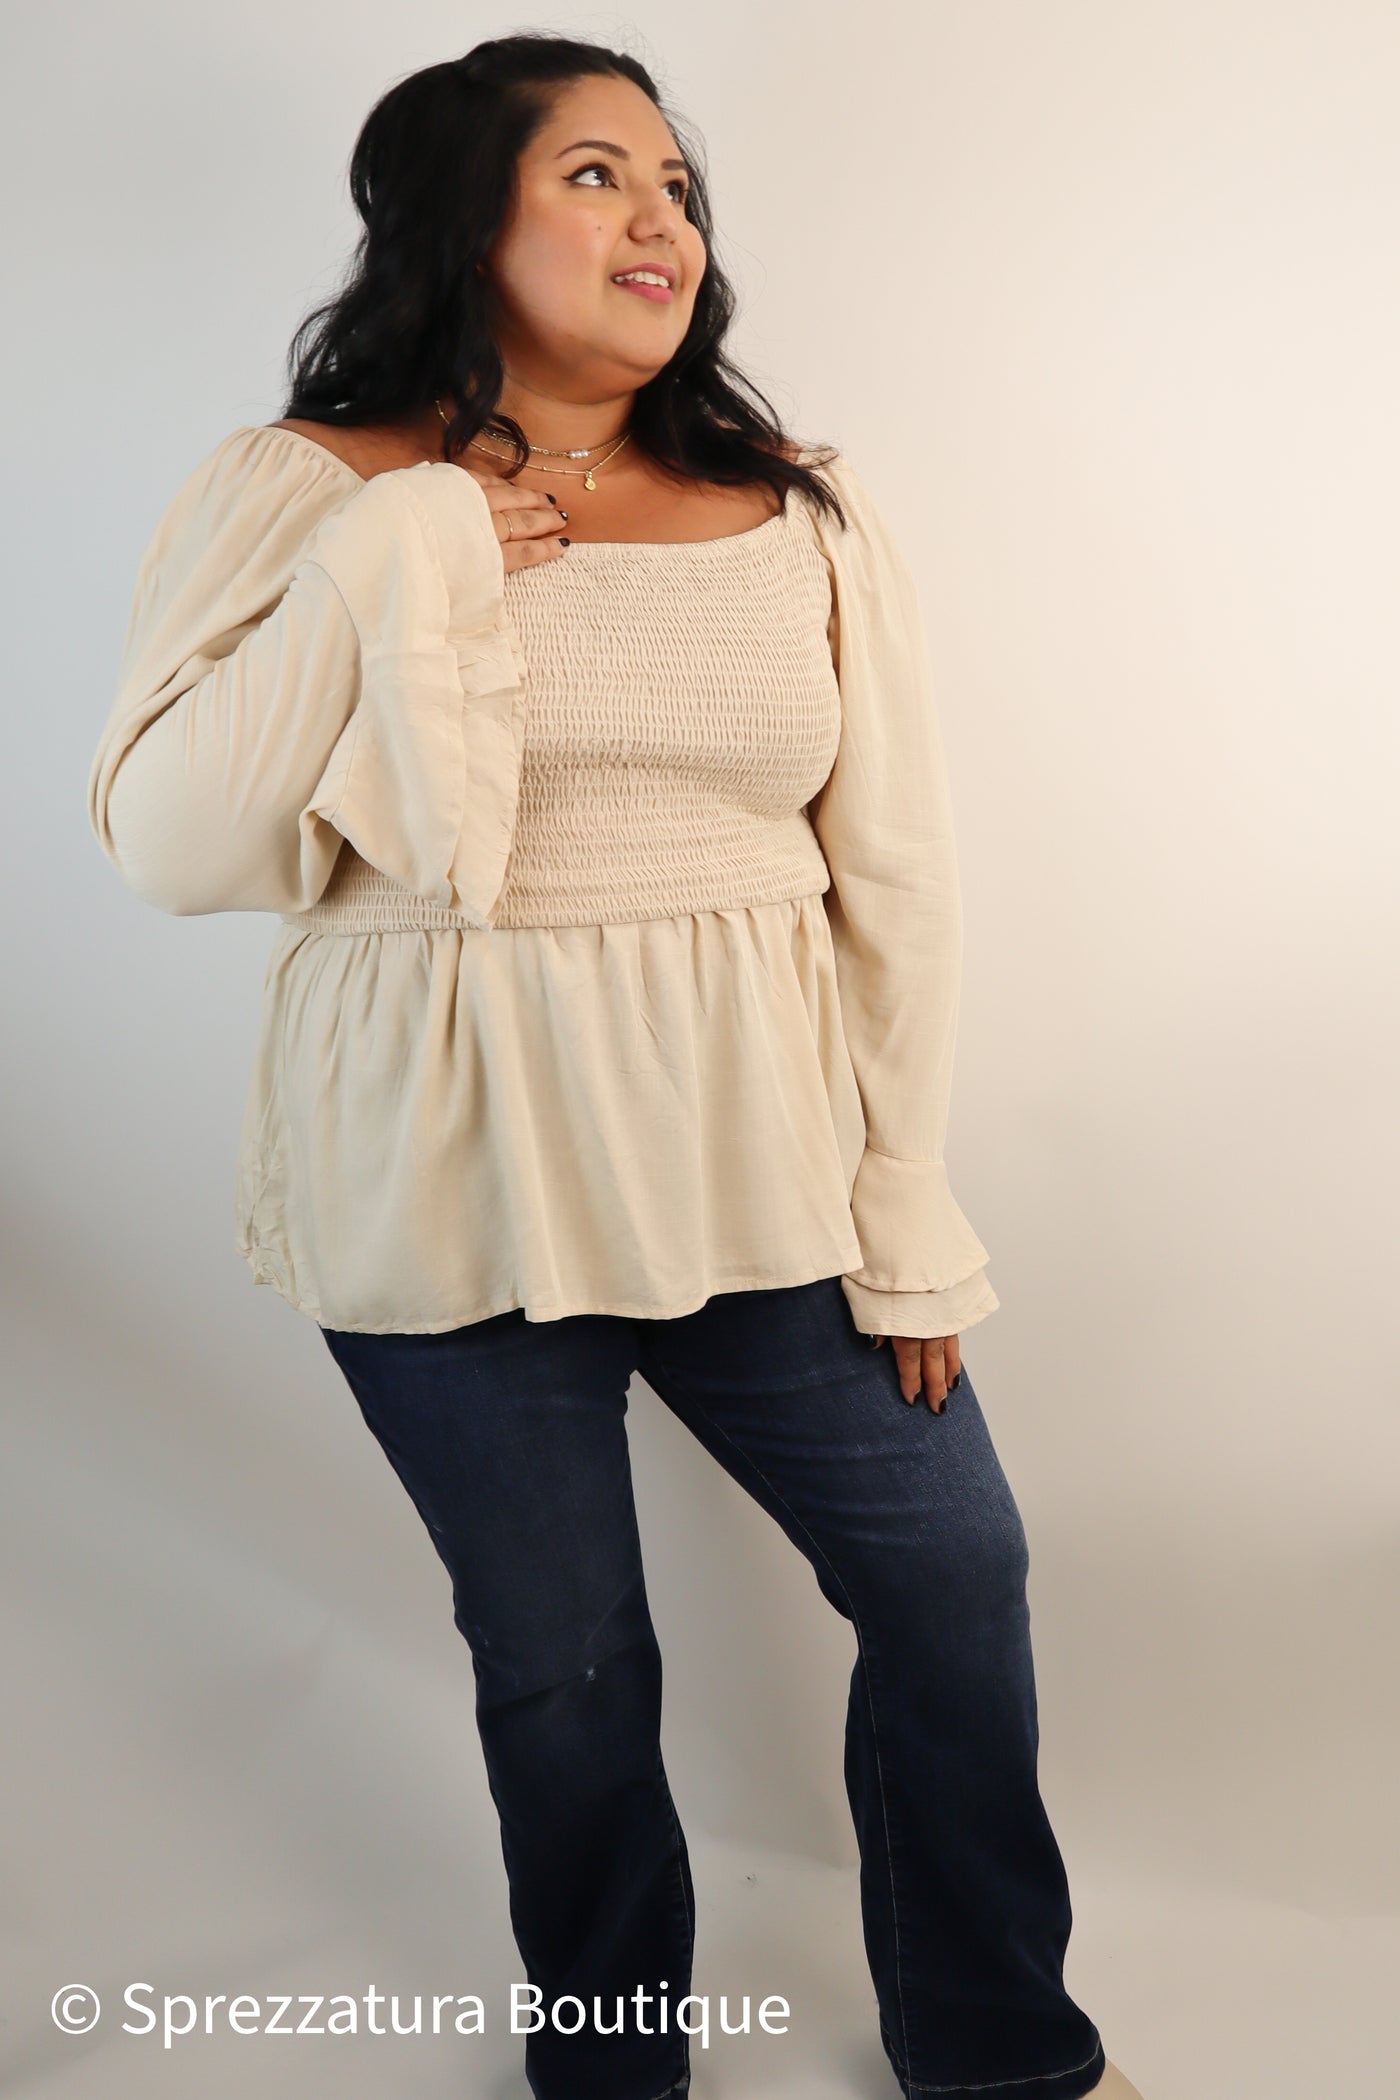 Taupe nude peplum blouse bell sleeve women's fashion top stylish work date dinner event dressy. Modern smart causal female chic effortless outfit womens ladies gift elegant effortless clothing clothes apparel outfits chic summer style women’s boutique trendy fall back to school teacher office cute outfit  lounge athleisure midsize curvy sizes